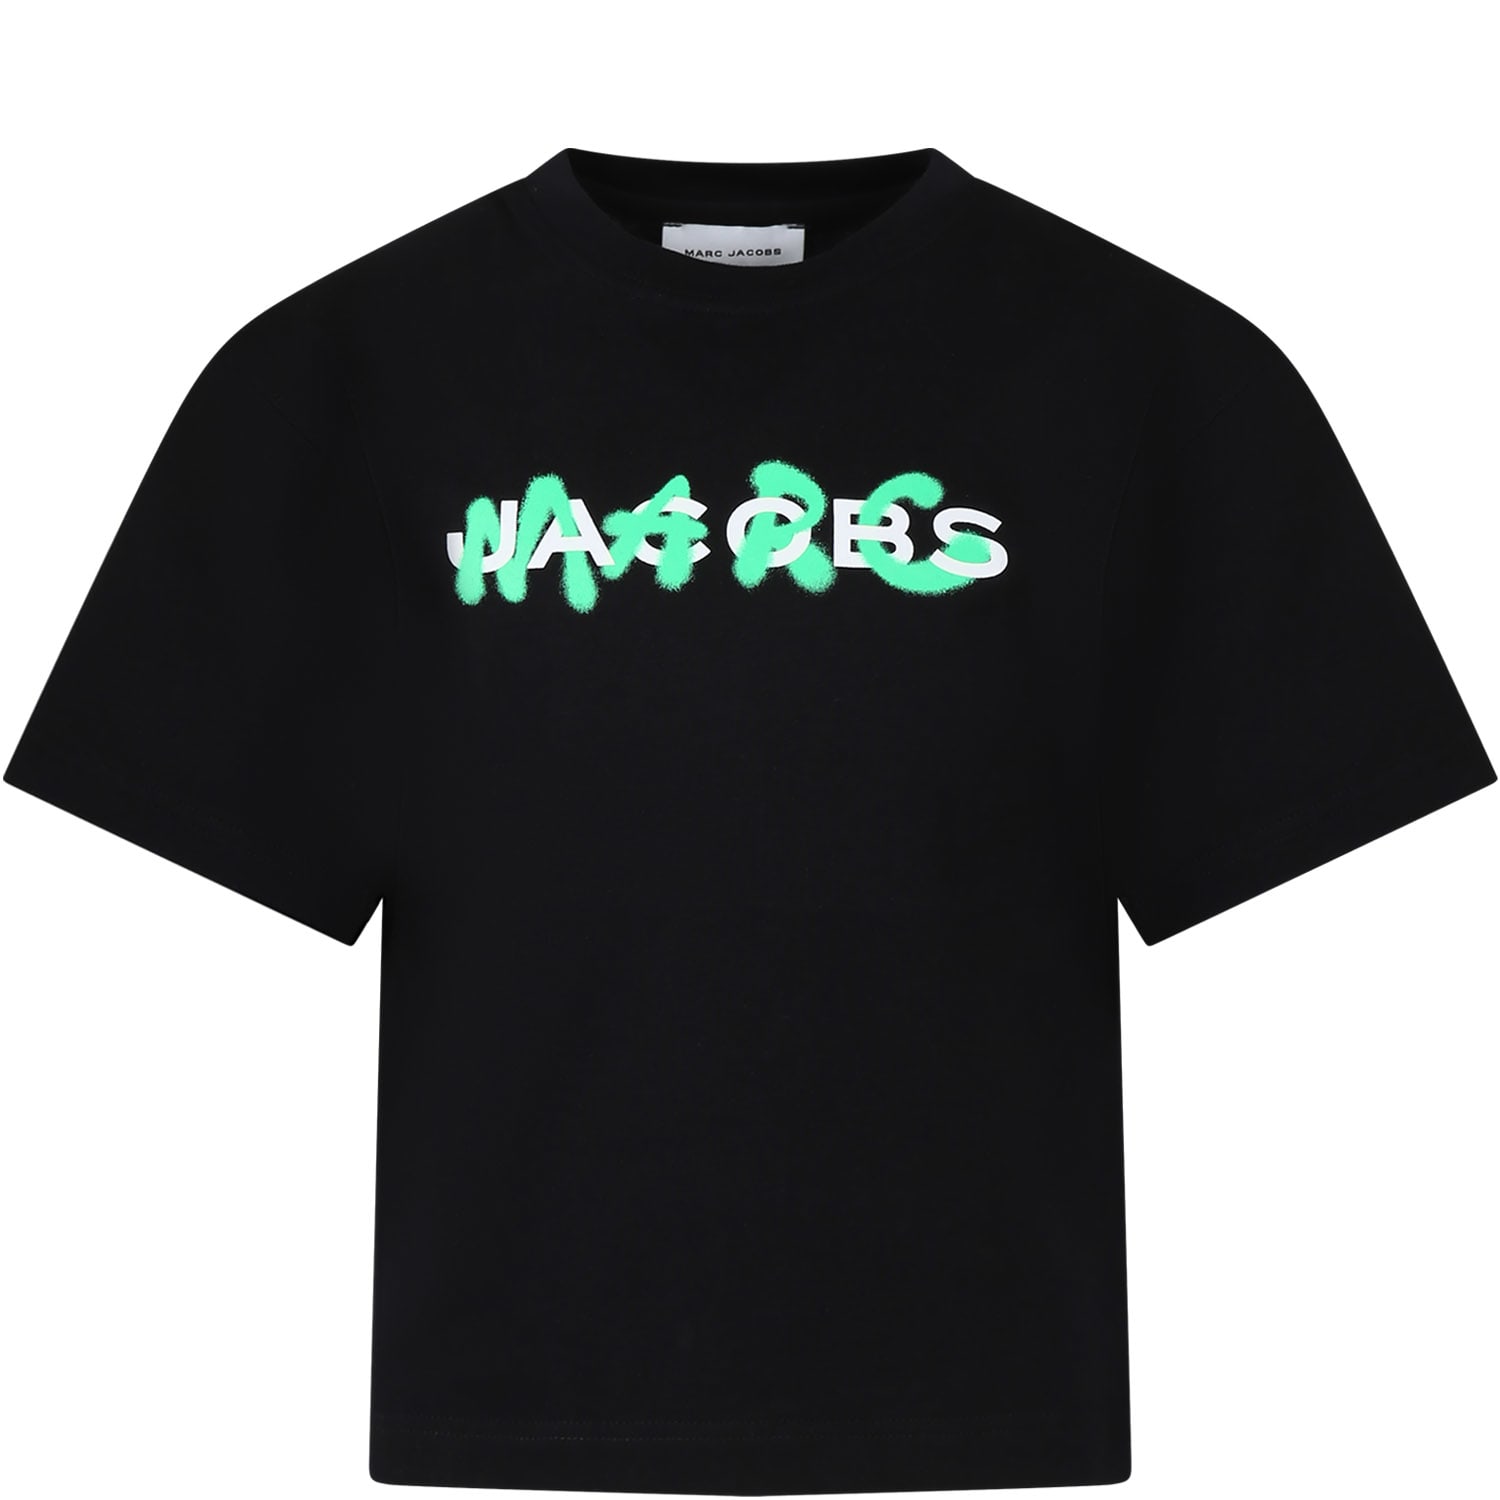 LITTLE MARC JACOBS BLACK T-SHIRT FOR KIDS WITH LOGO